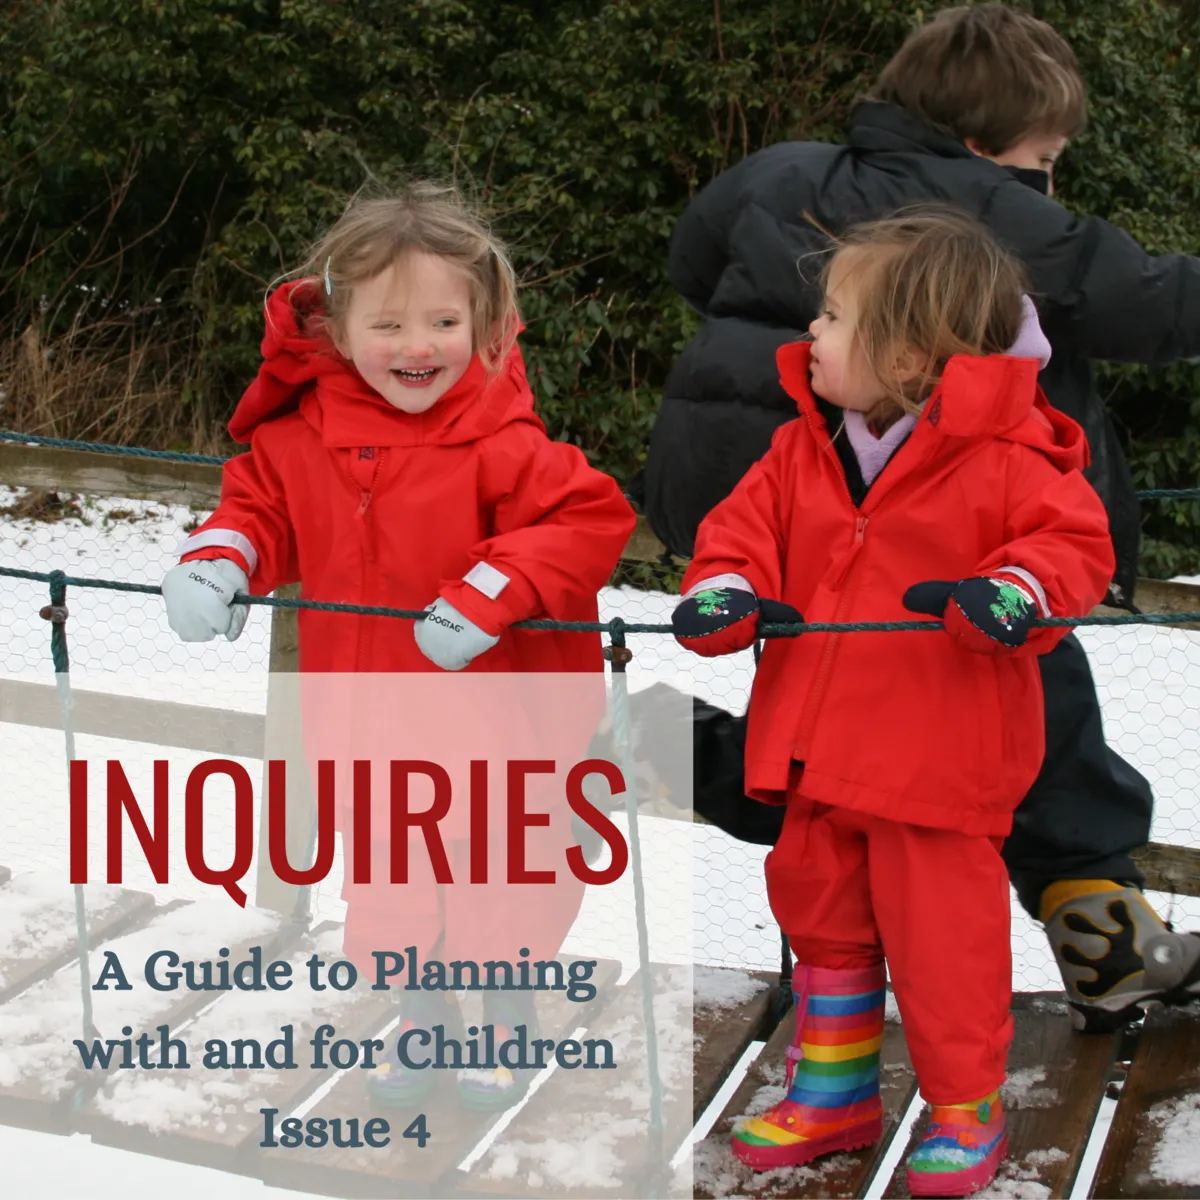 FREE DOWNLOAD - Inquiries - Issue 4 - Finding joy in small moments